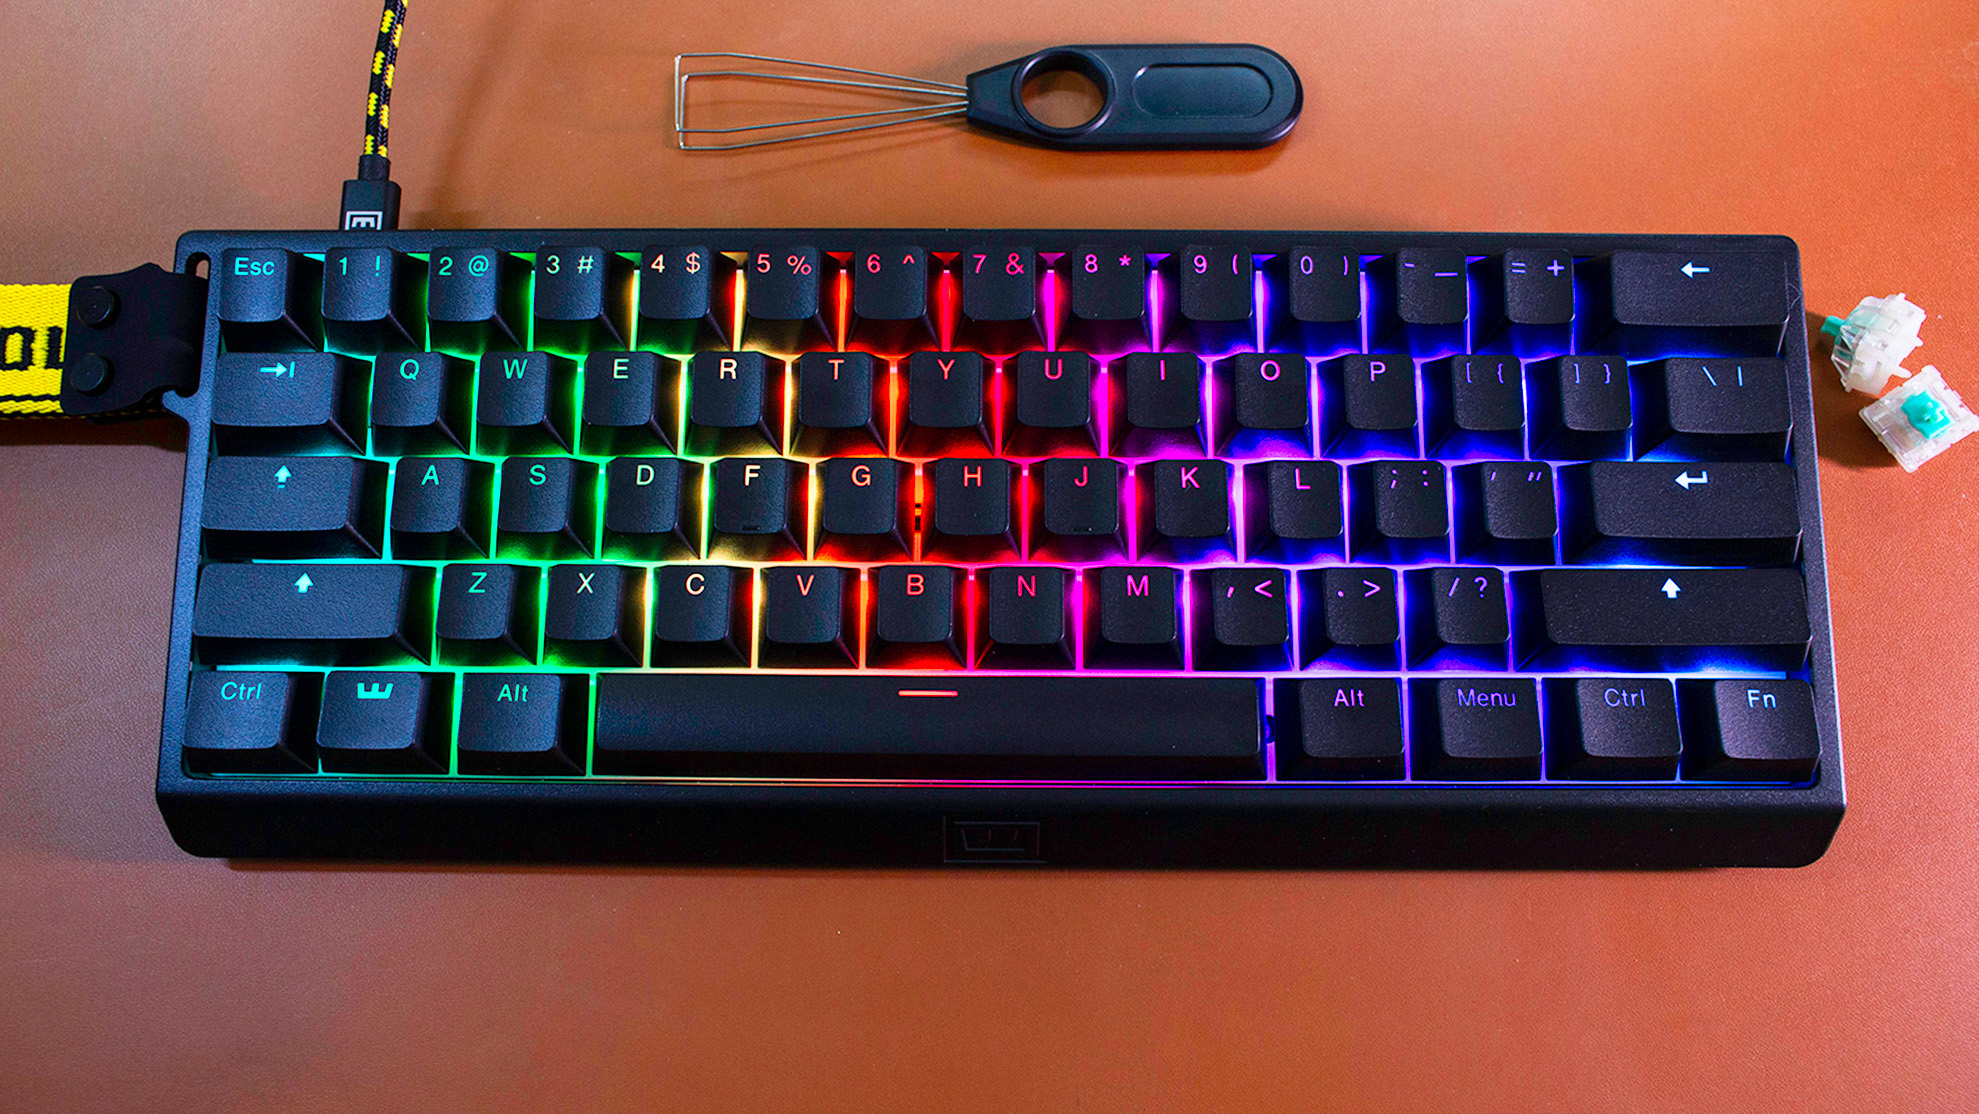 I'm a keyboard enthusiast and this is the best gaming keyboard right